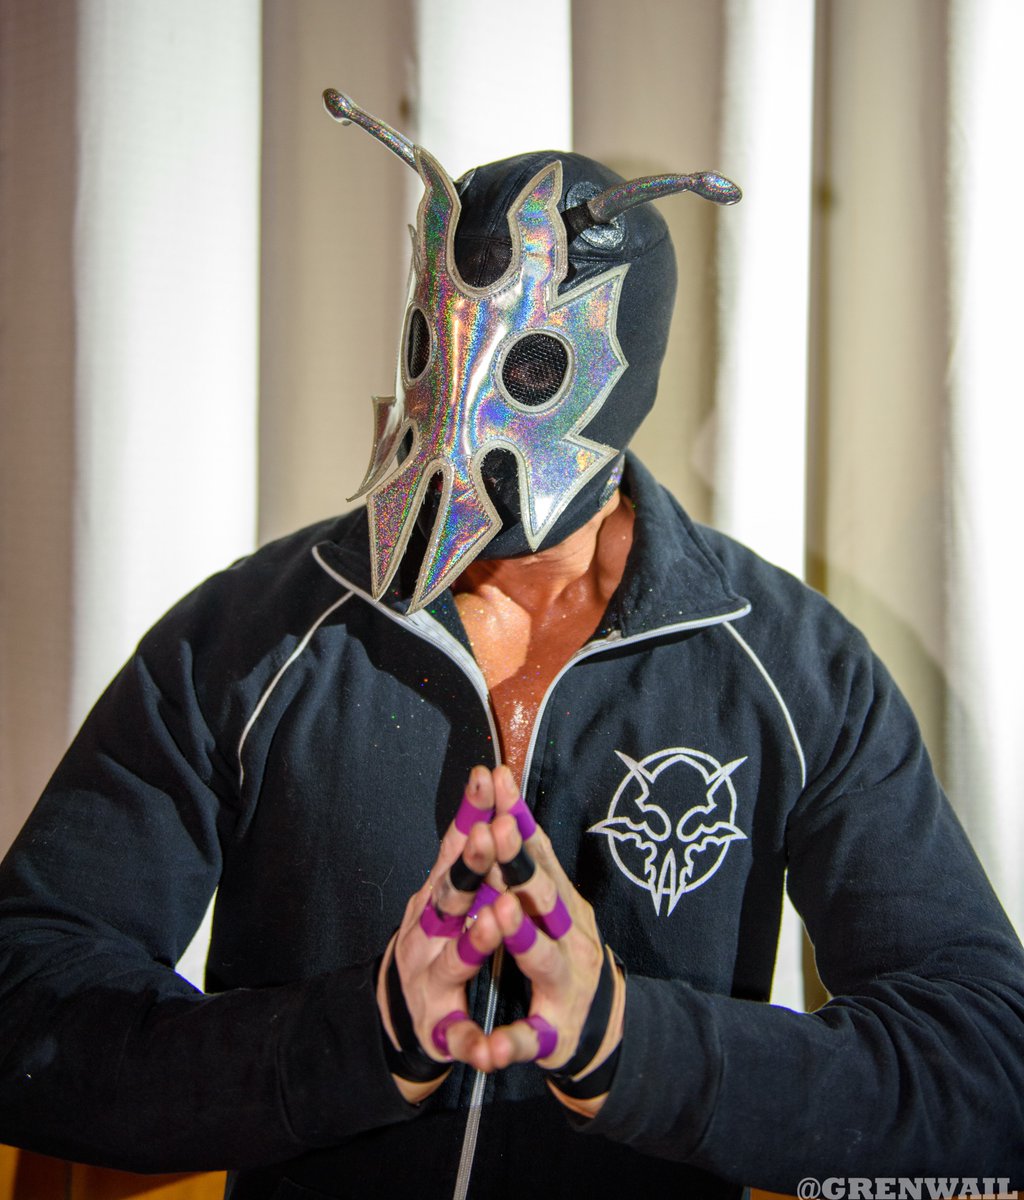 Today is the day for @DaikaijuPro Vol 2 . Will Ultramantis Black set the stage for a Kappa invasion? Or will the heroes turn him back once again? Tonight the tide of fate is determined.